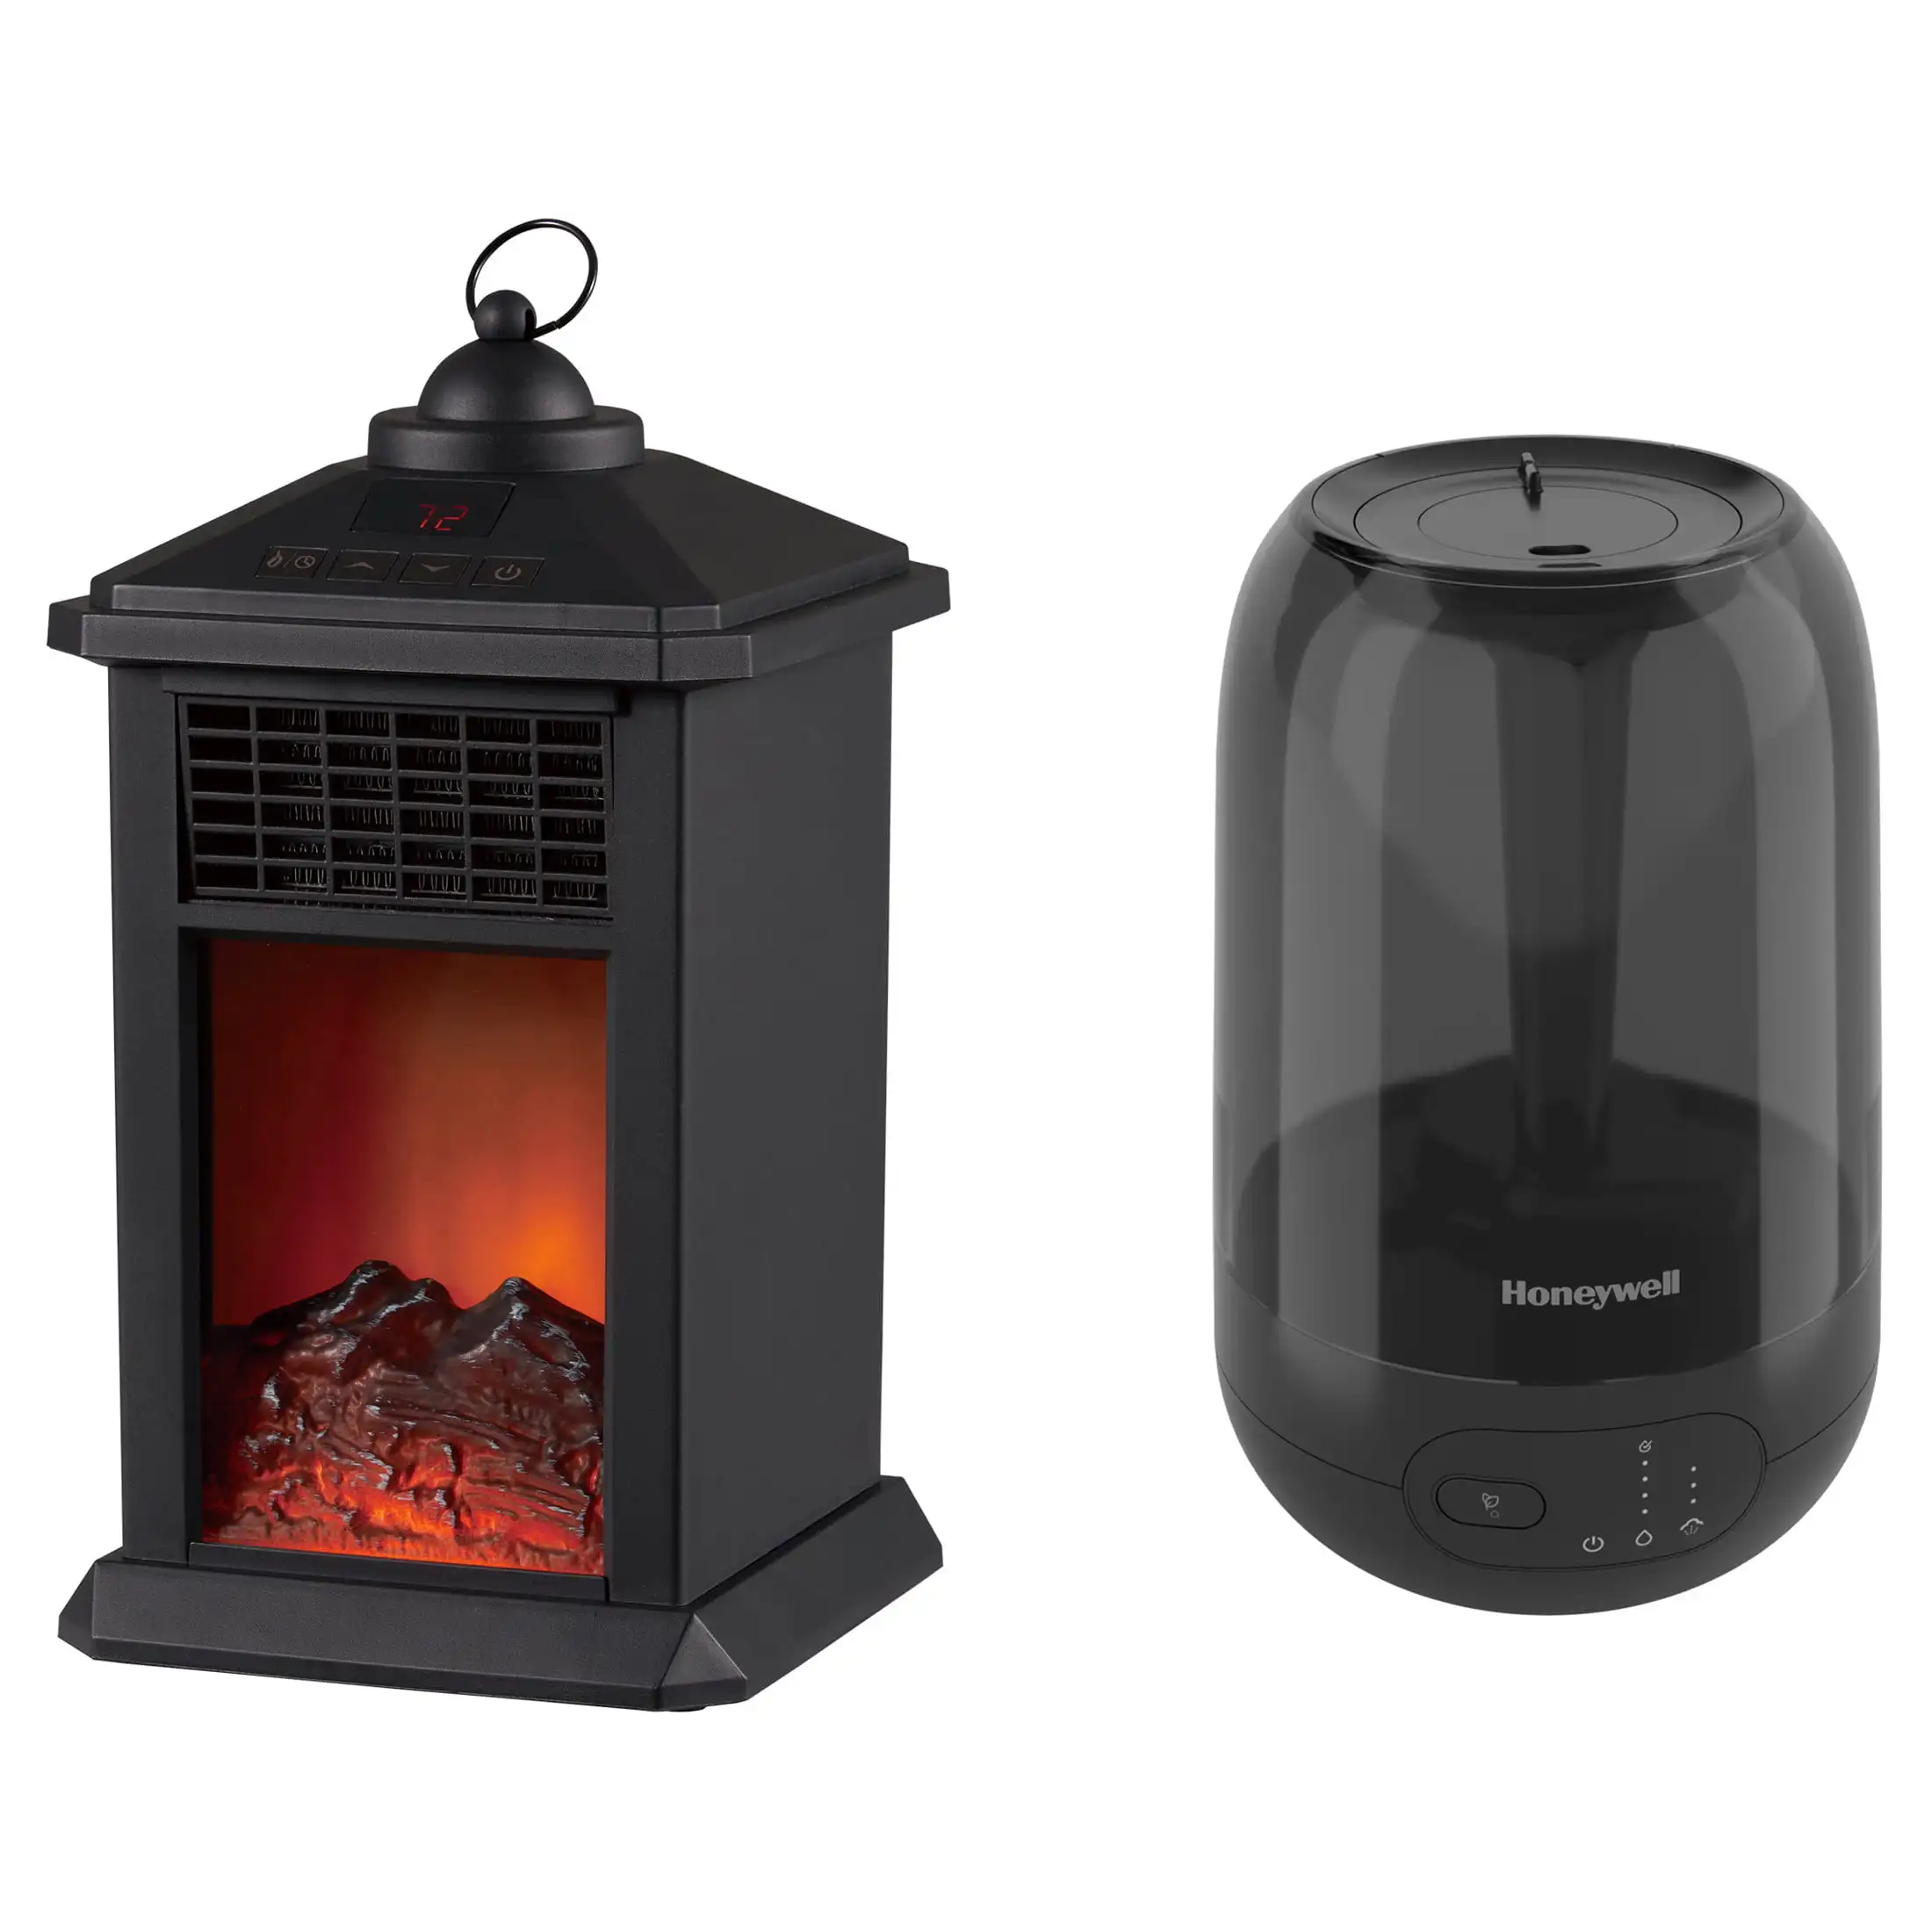 WEWARM Electric Ceramic Desktop Lantern Fireplace and  Ultra Plus Cool Mist Humidifier for Large Rooms, HUL565B, Black